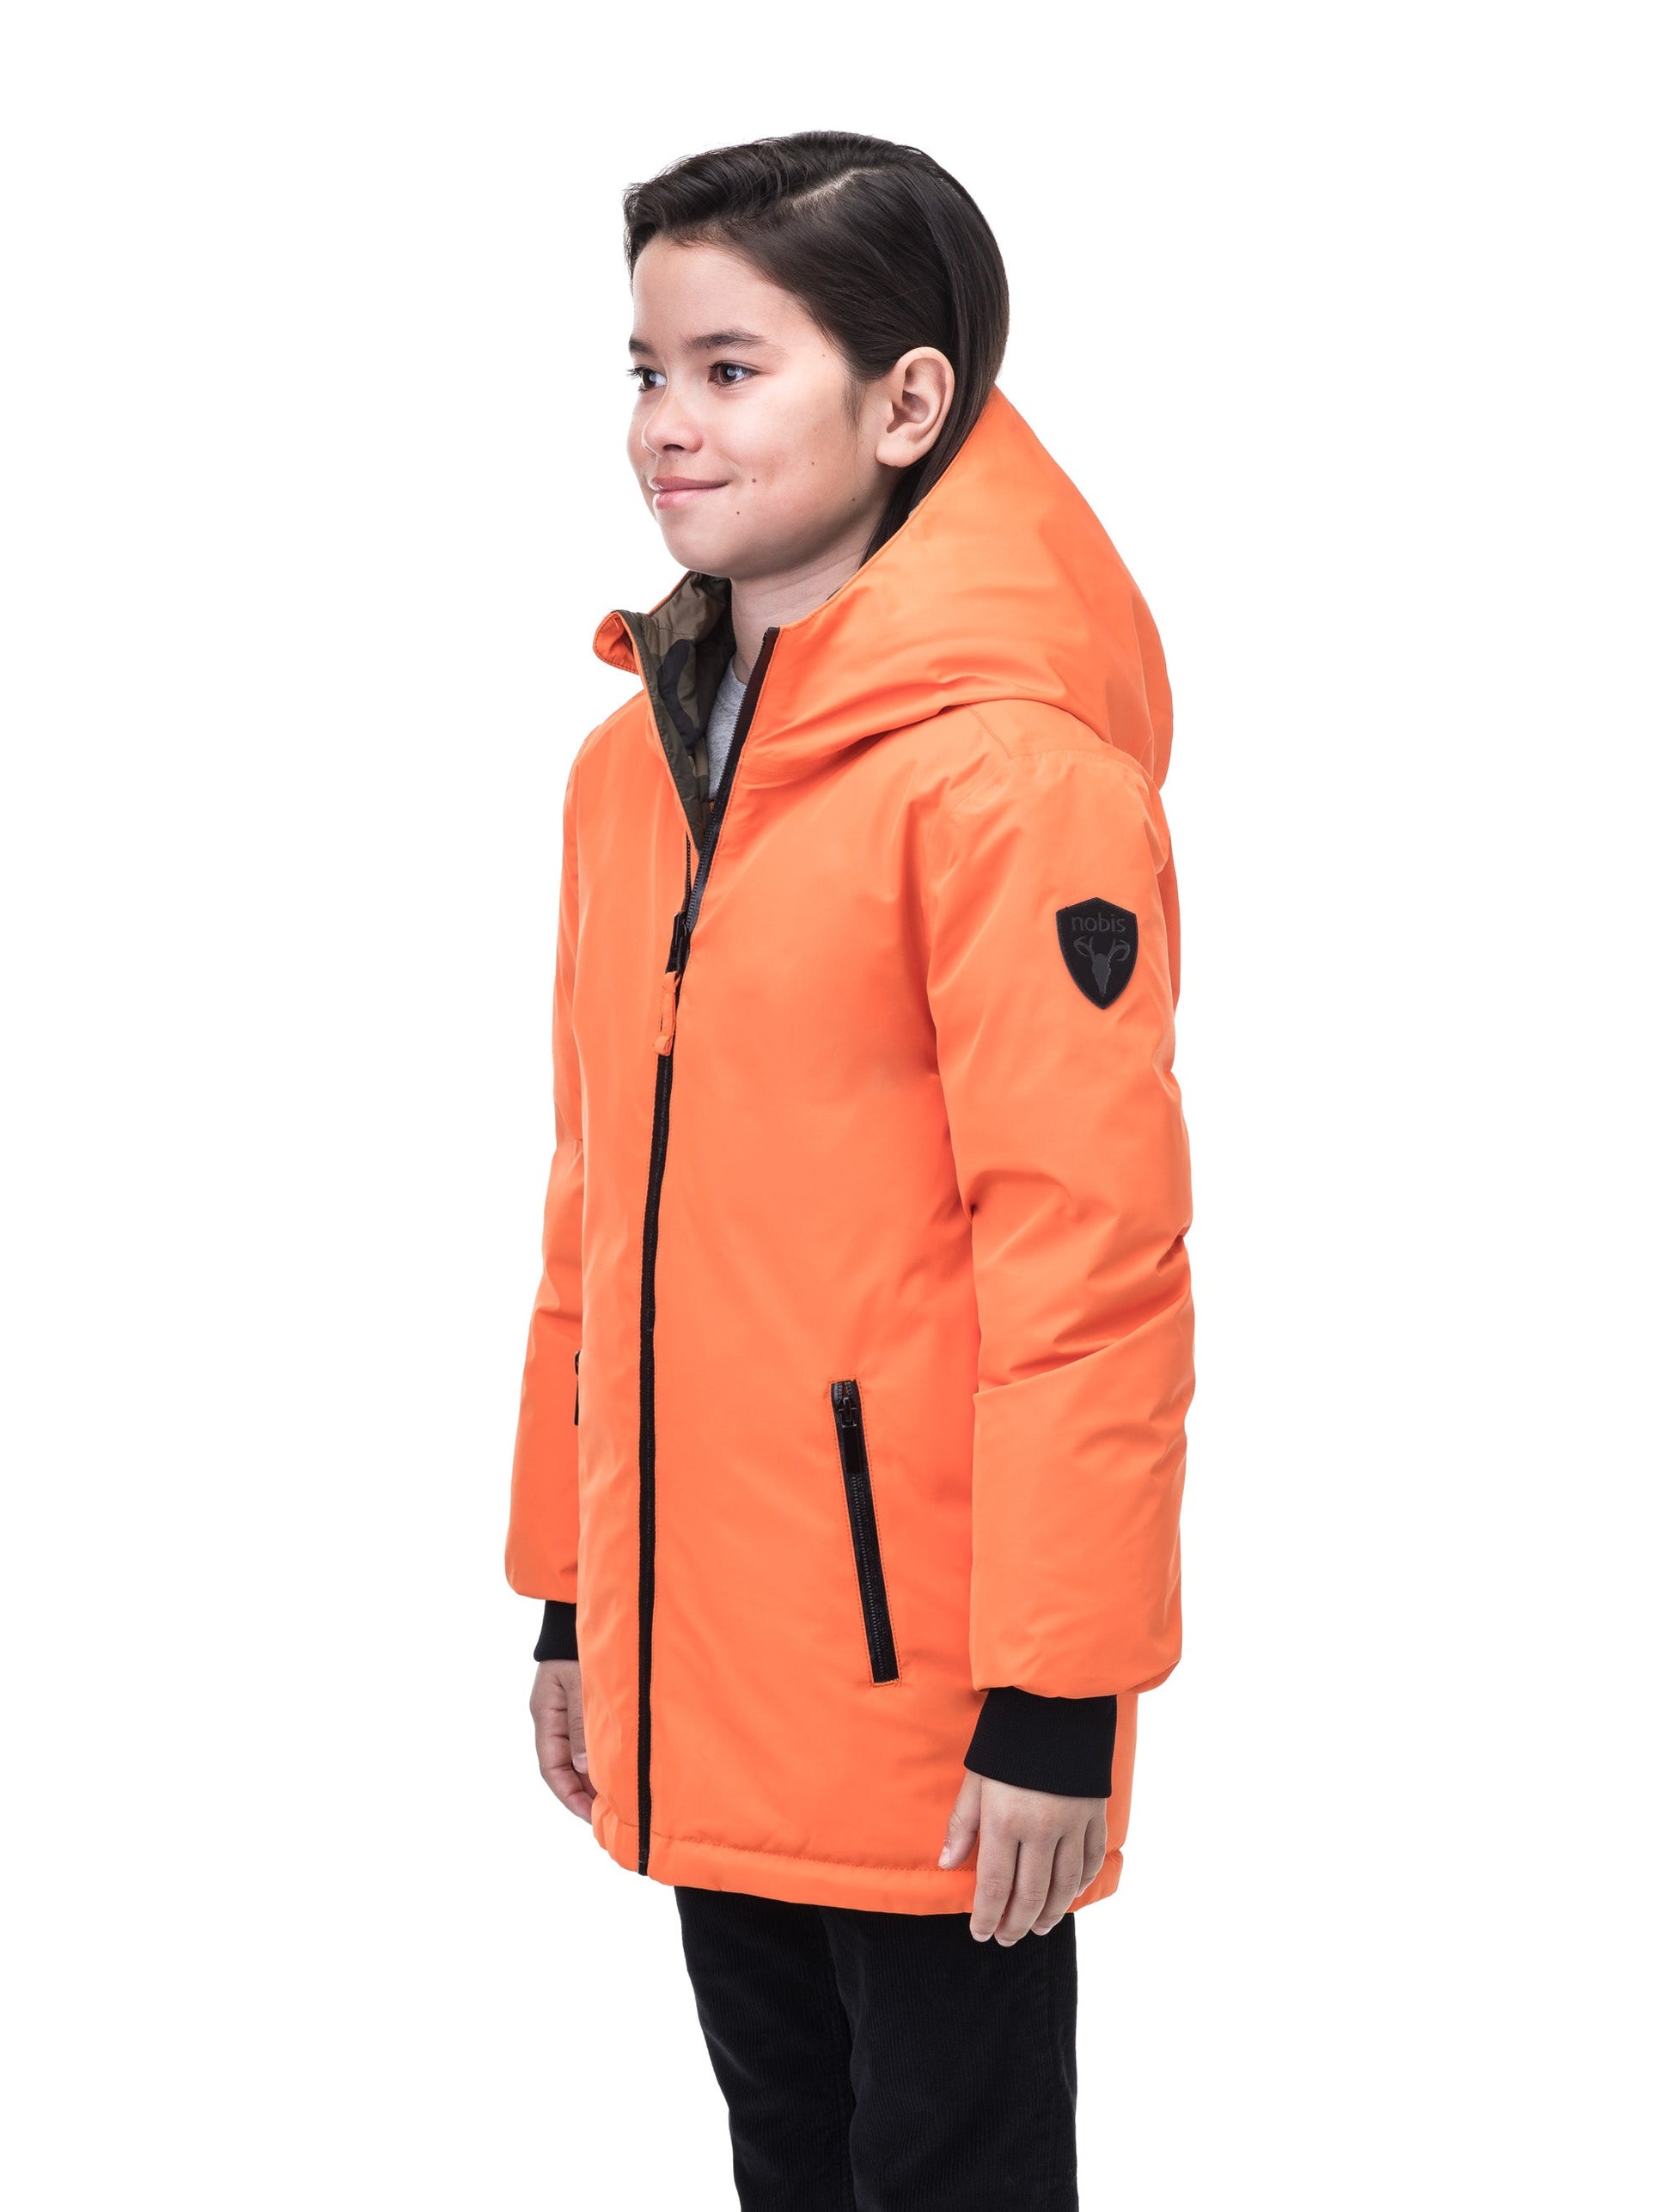 Kids' reversible knee length, down filled parka with waterproof finish in Atomic/Camo